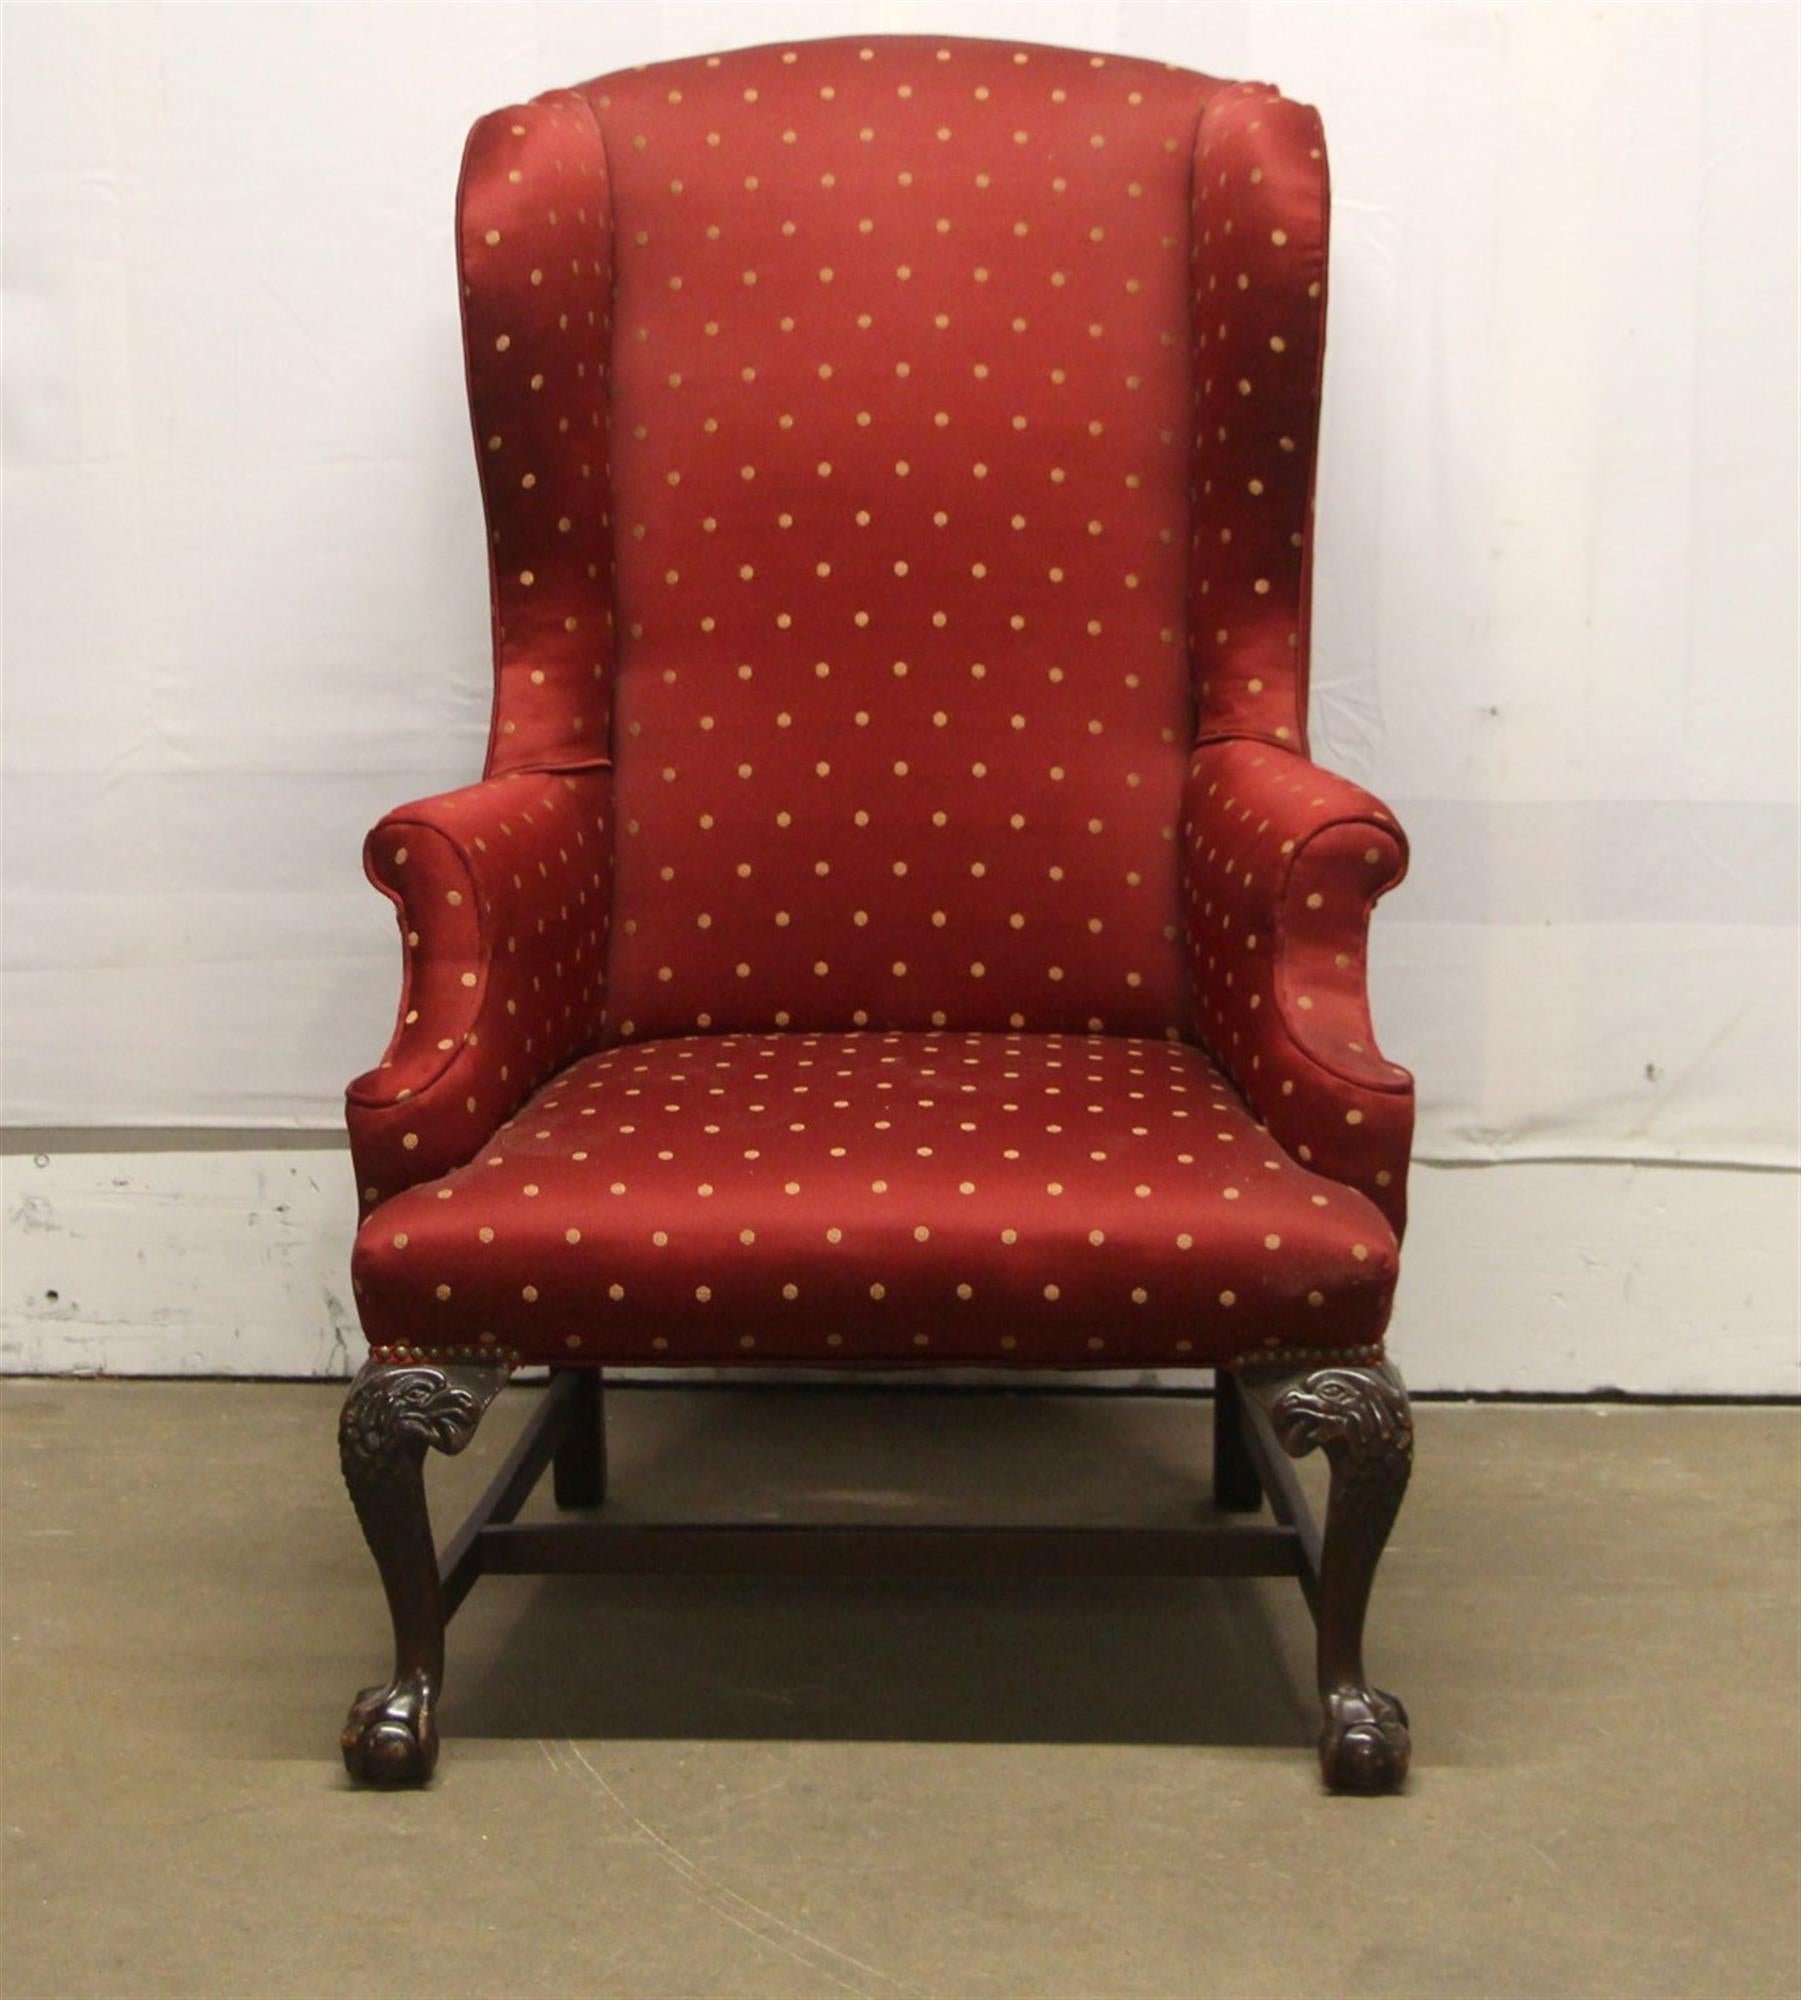 1890s carved wood wing back chair with newly reupholstered deep red gold dotted upholstery. Dark wood tone frame with carved figural legs. There is general wear from age and use. This can be seen at our 302 Bowery location in NoHo in Manhattan